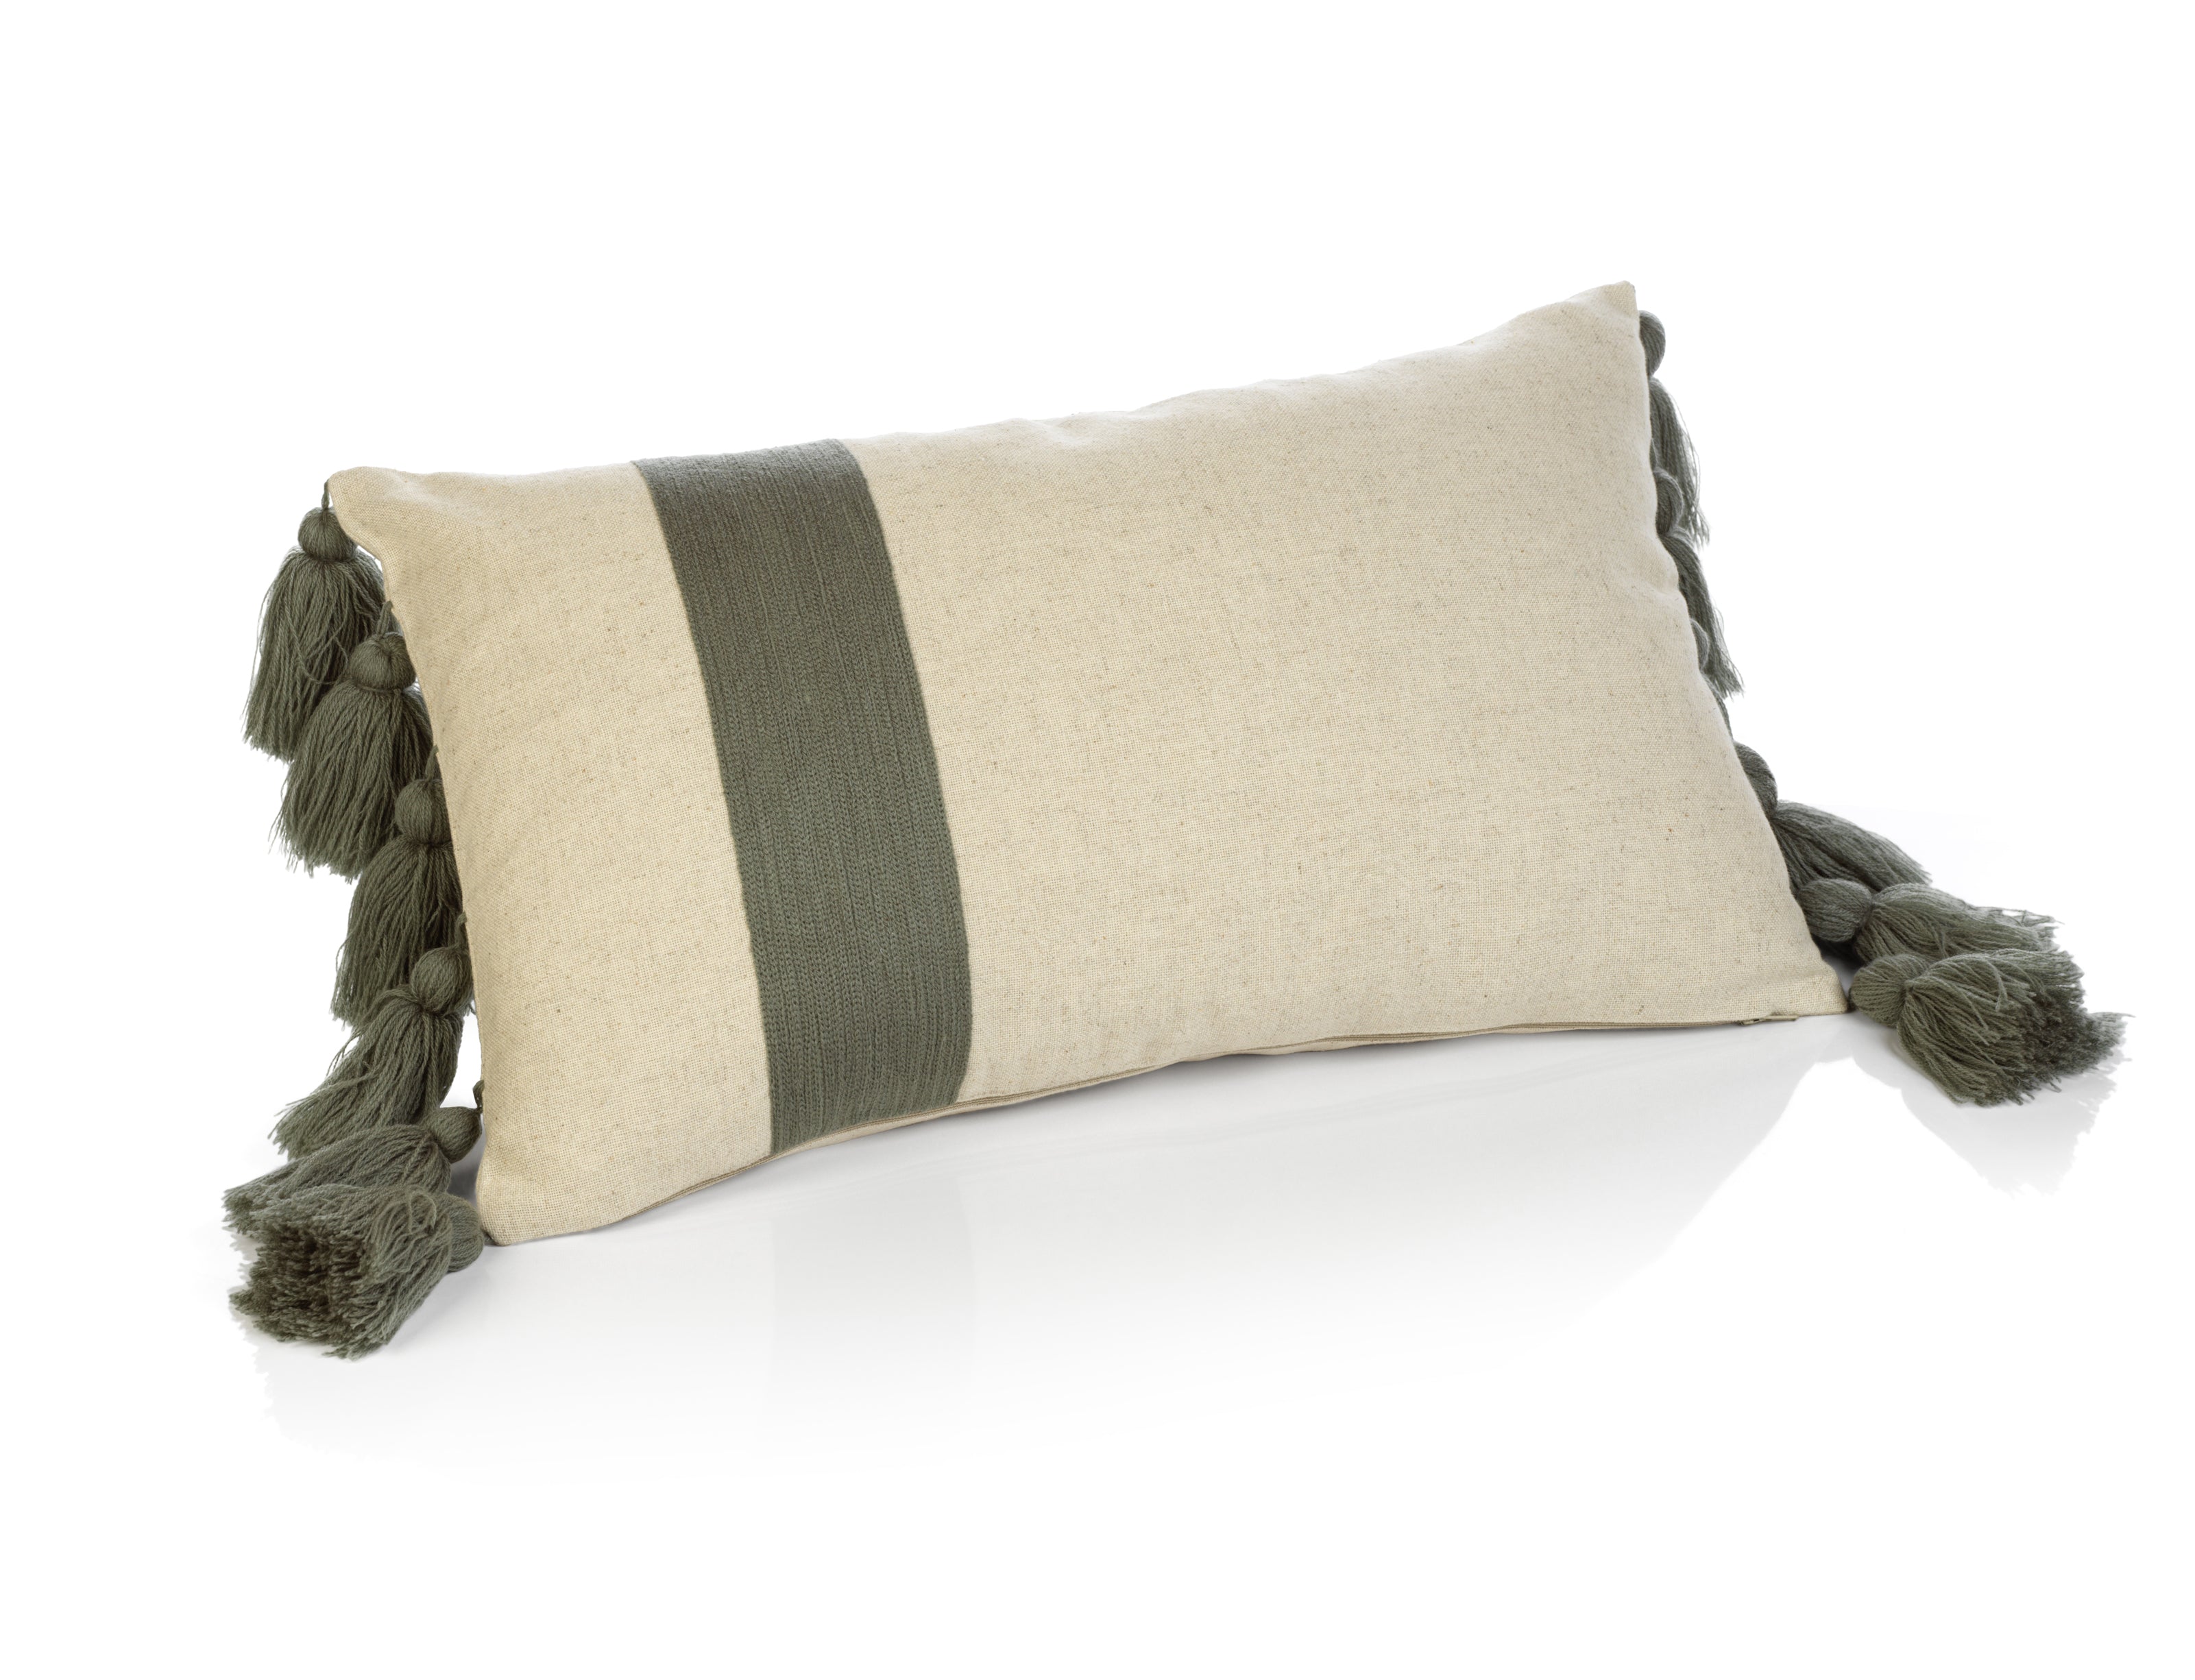 Polignano Embroidered Throw Pillow w/Tassels - Sage - CARLYLE AVENUE